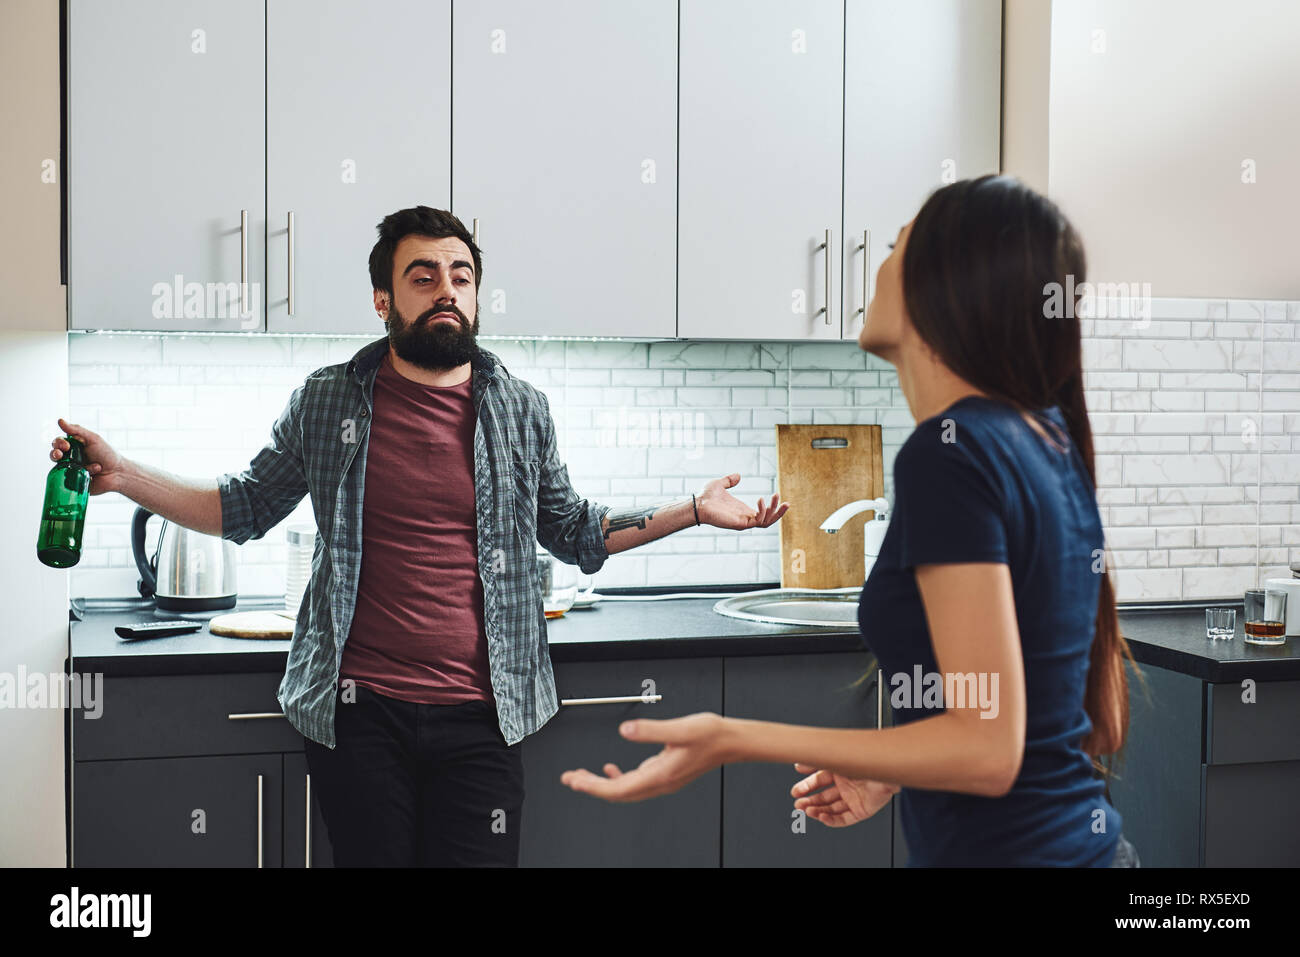 Drunk husband. Dark-haired addicted woman feeling despair while arguing with her drunk husband. He is standing in the kitchen, with a bottle of alcoho Stock Photo